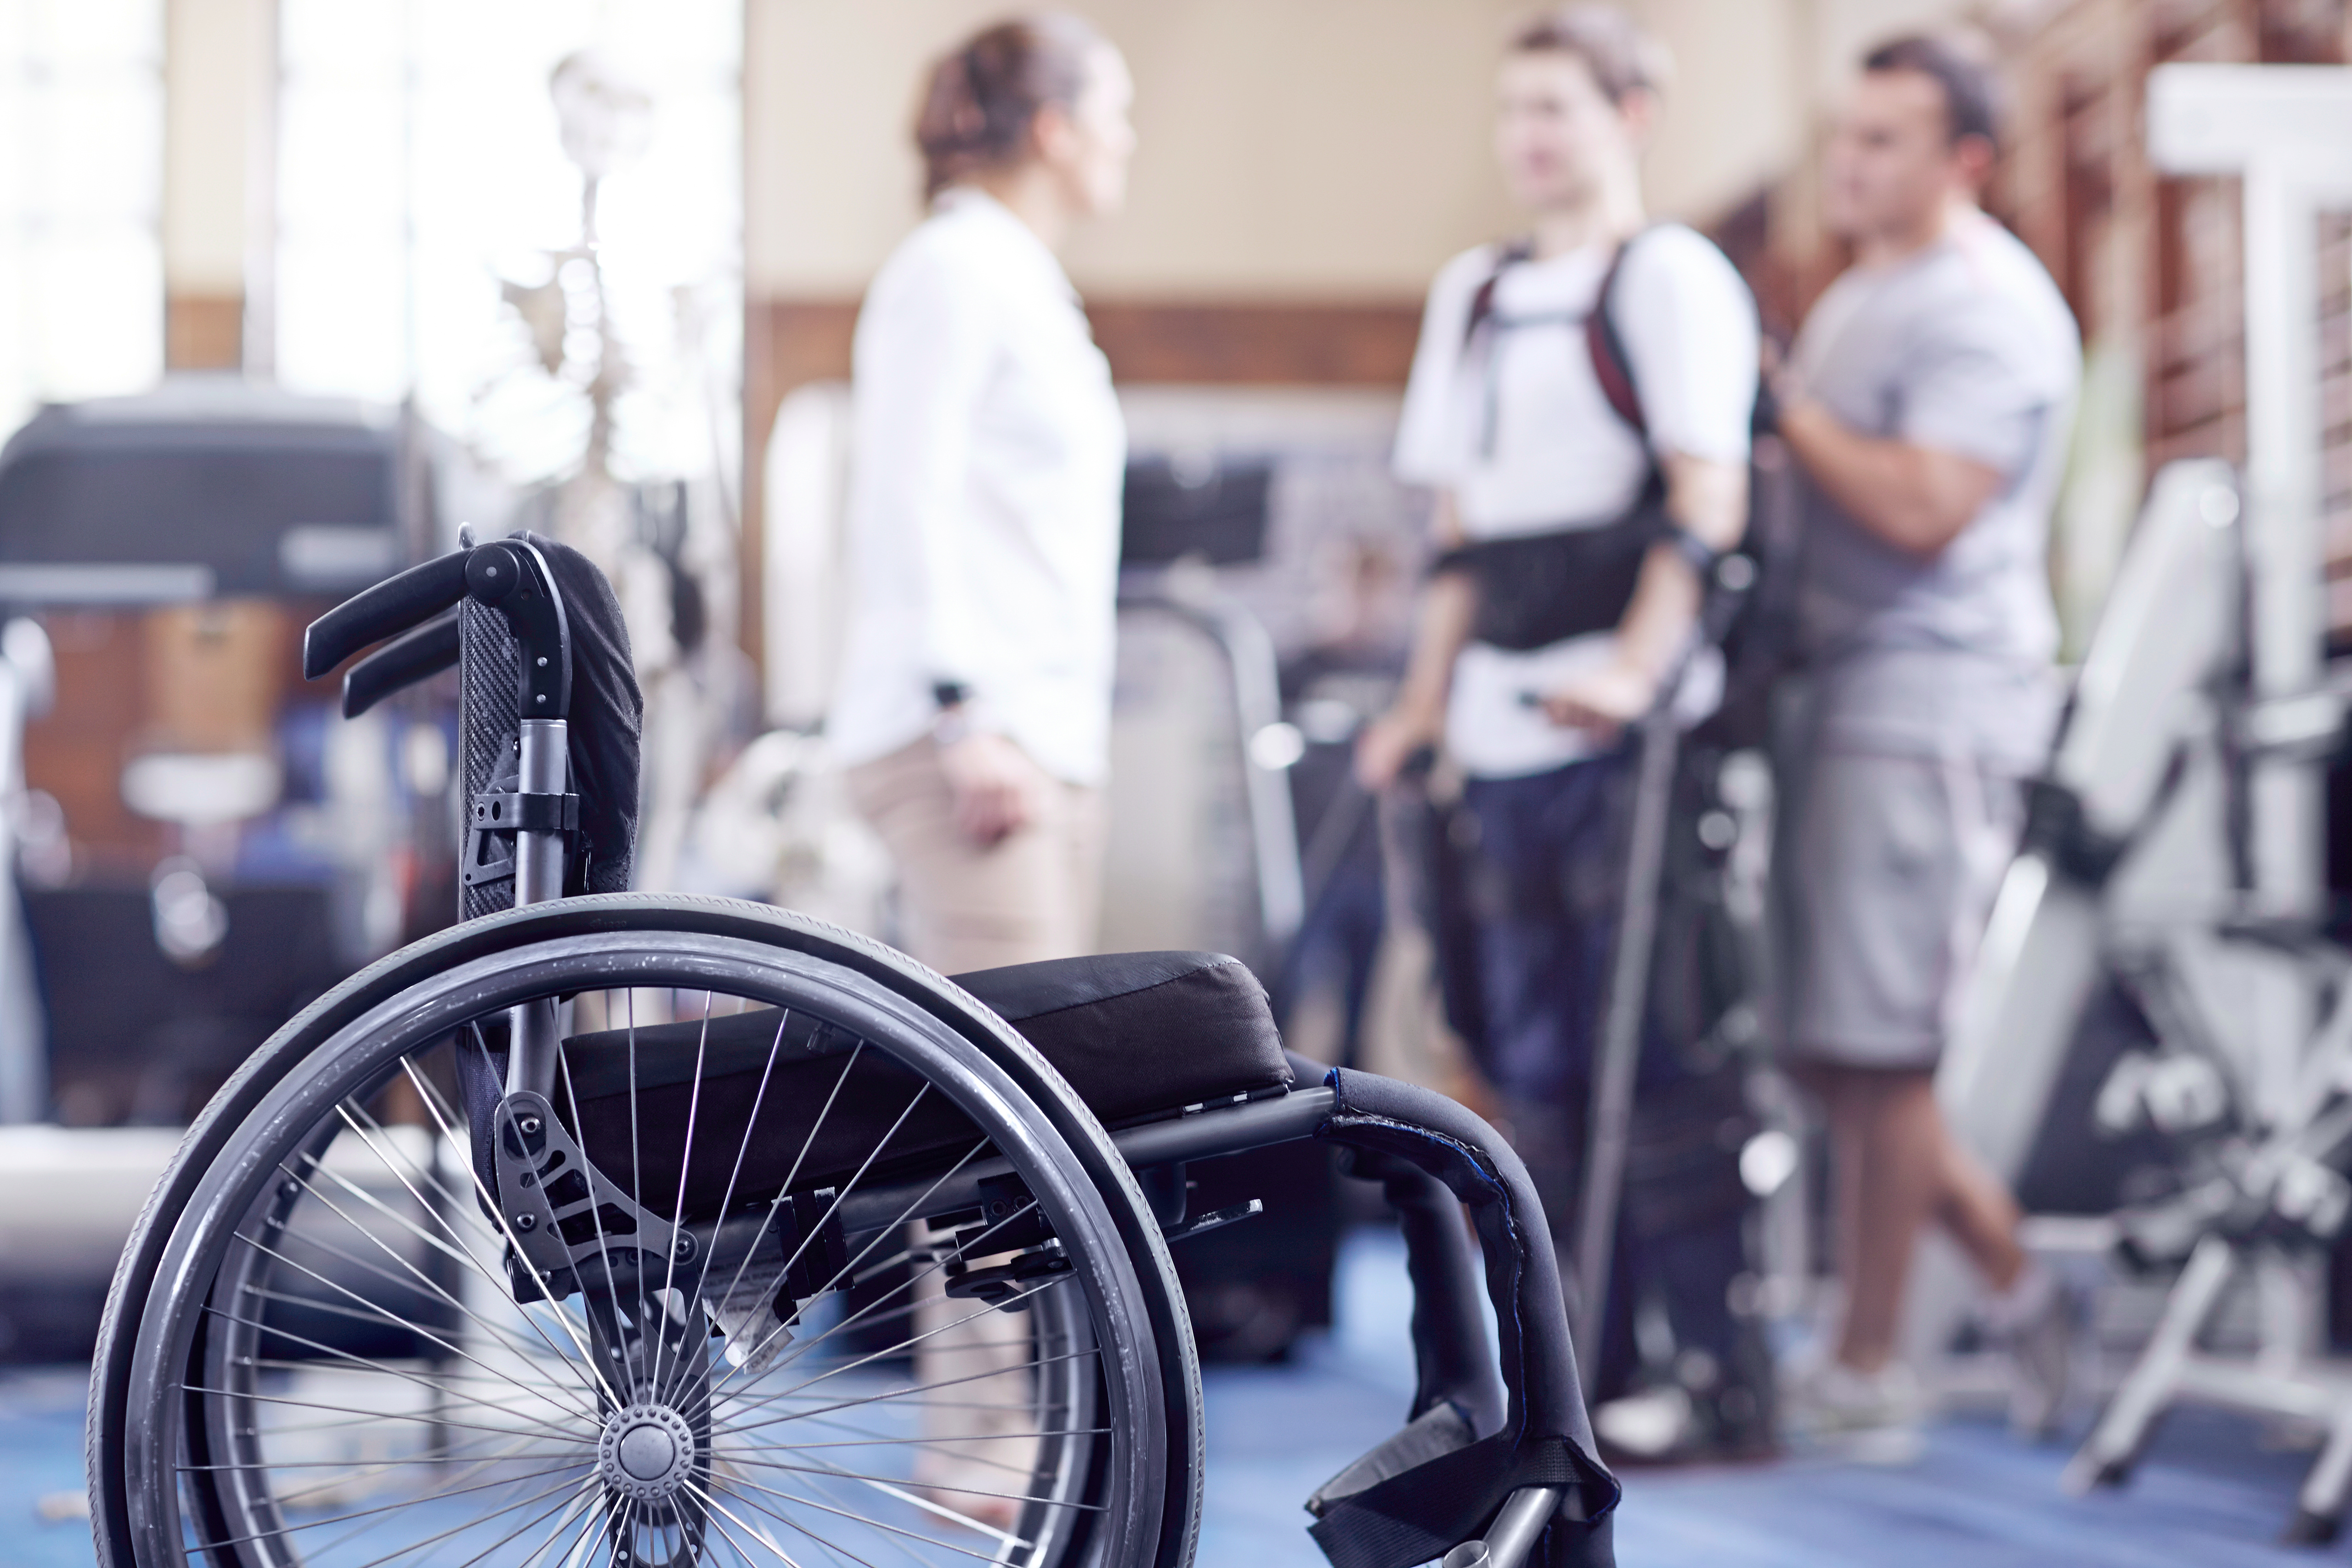 Man receiving physical therapy with wheelchair in foreground.